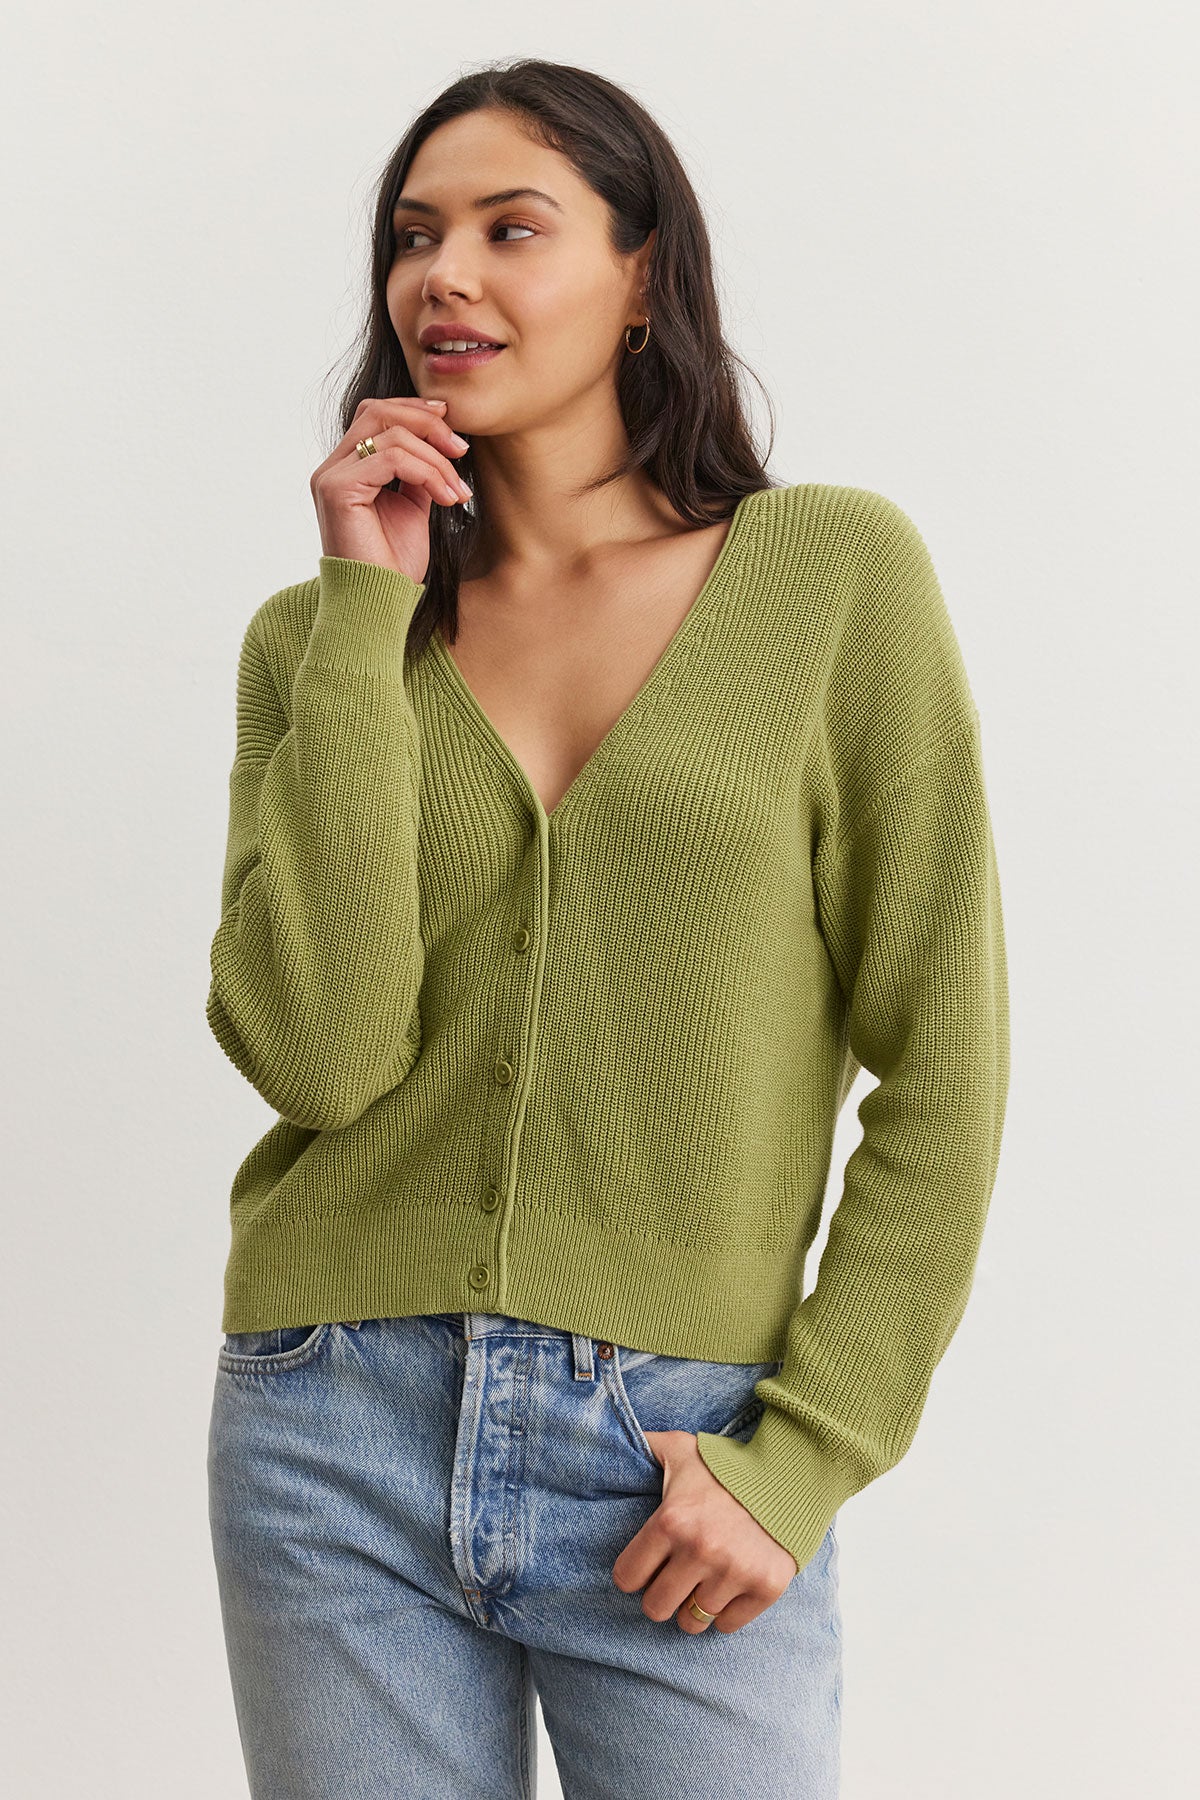   Woman in a green Velvet by Graham & Spencer Tava cardigan and blue jeans standing against a white background, touching her chin thoughtfully. 